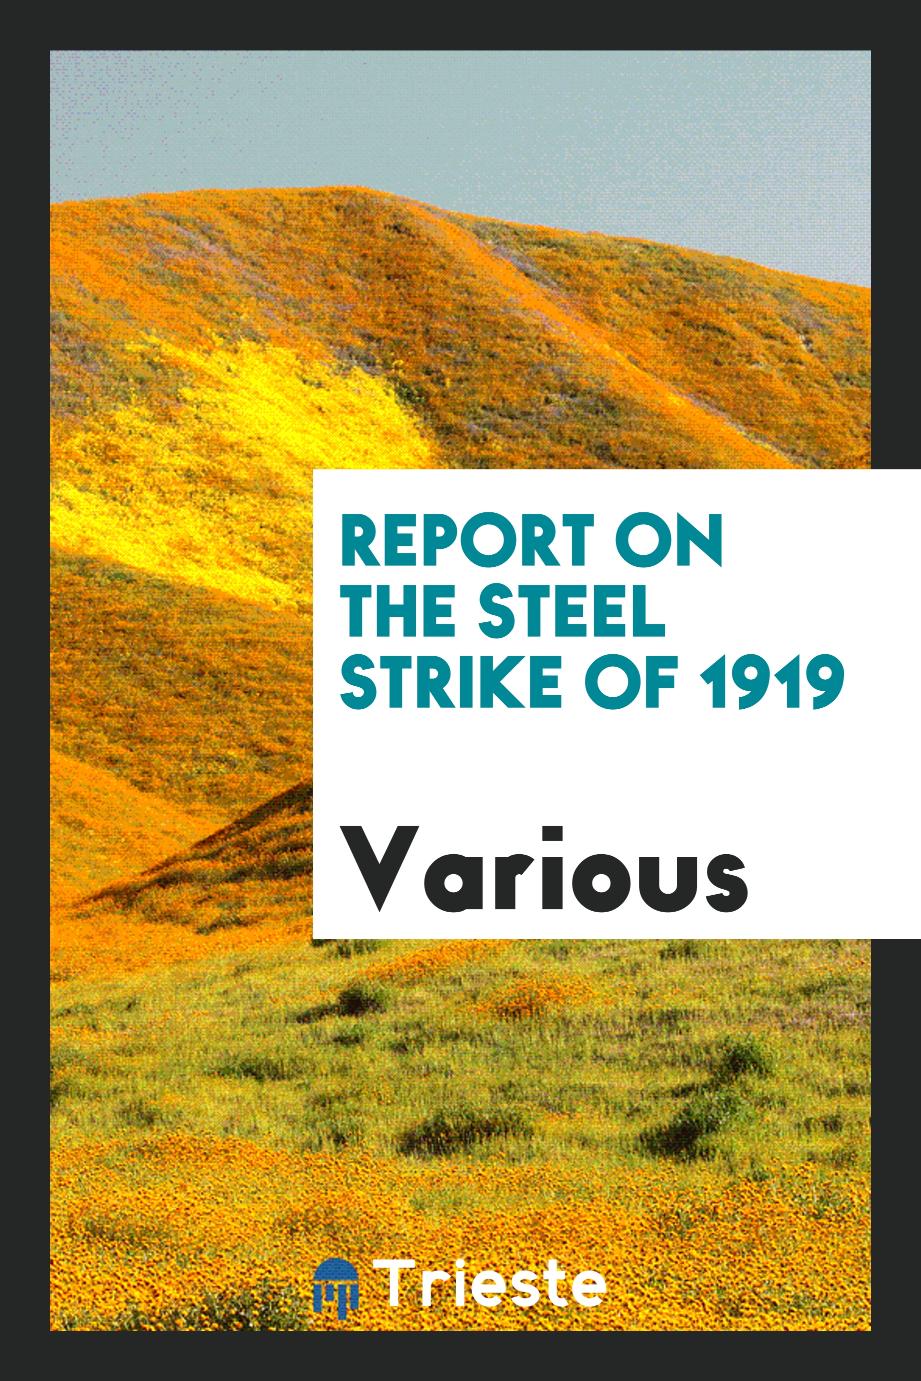 Report on the steel strike of 1919